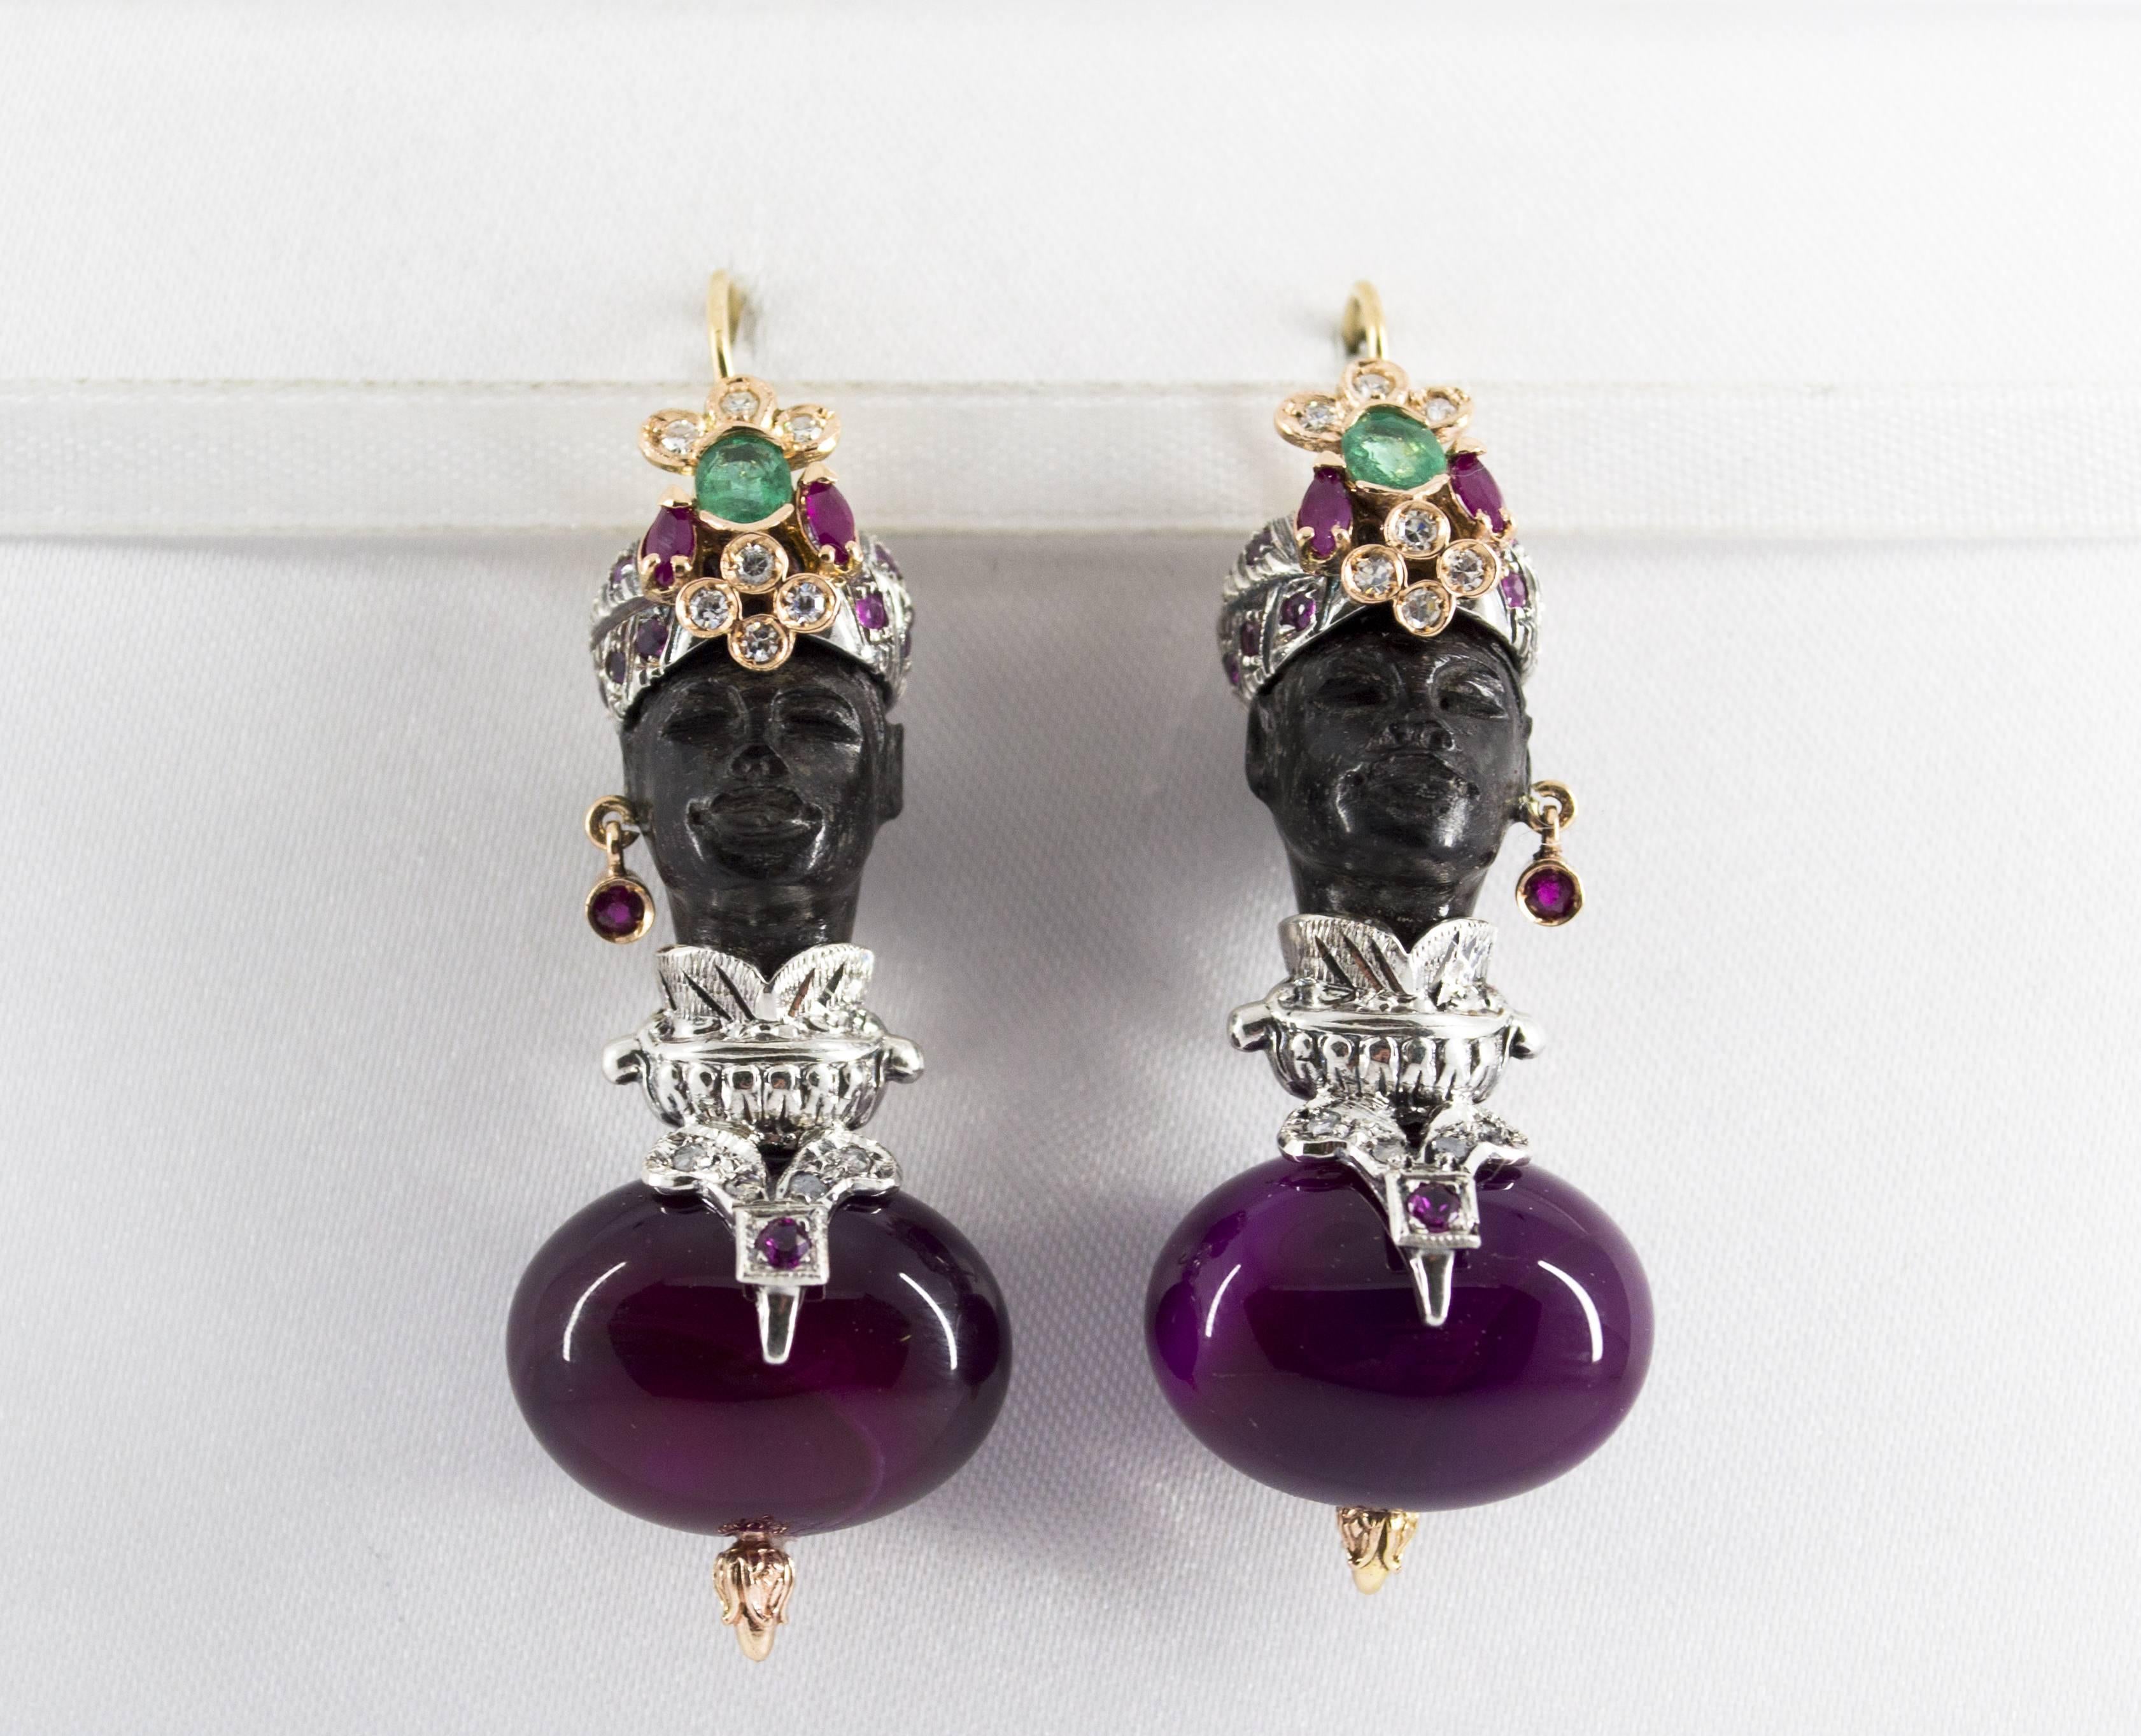 These Earrings are made of 9K Yellow Gold and Sterling Silver.
These Earrings have 0.35 Carats of Diamonds.
These Earrings have 1.90 Carats of Emeralds and Rubies.
These Earrings have also Ebony and Agate.
We're a workshop so every piece is